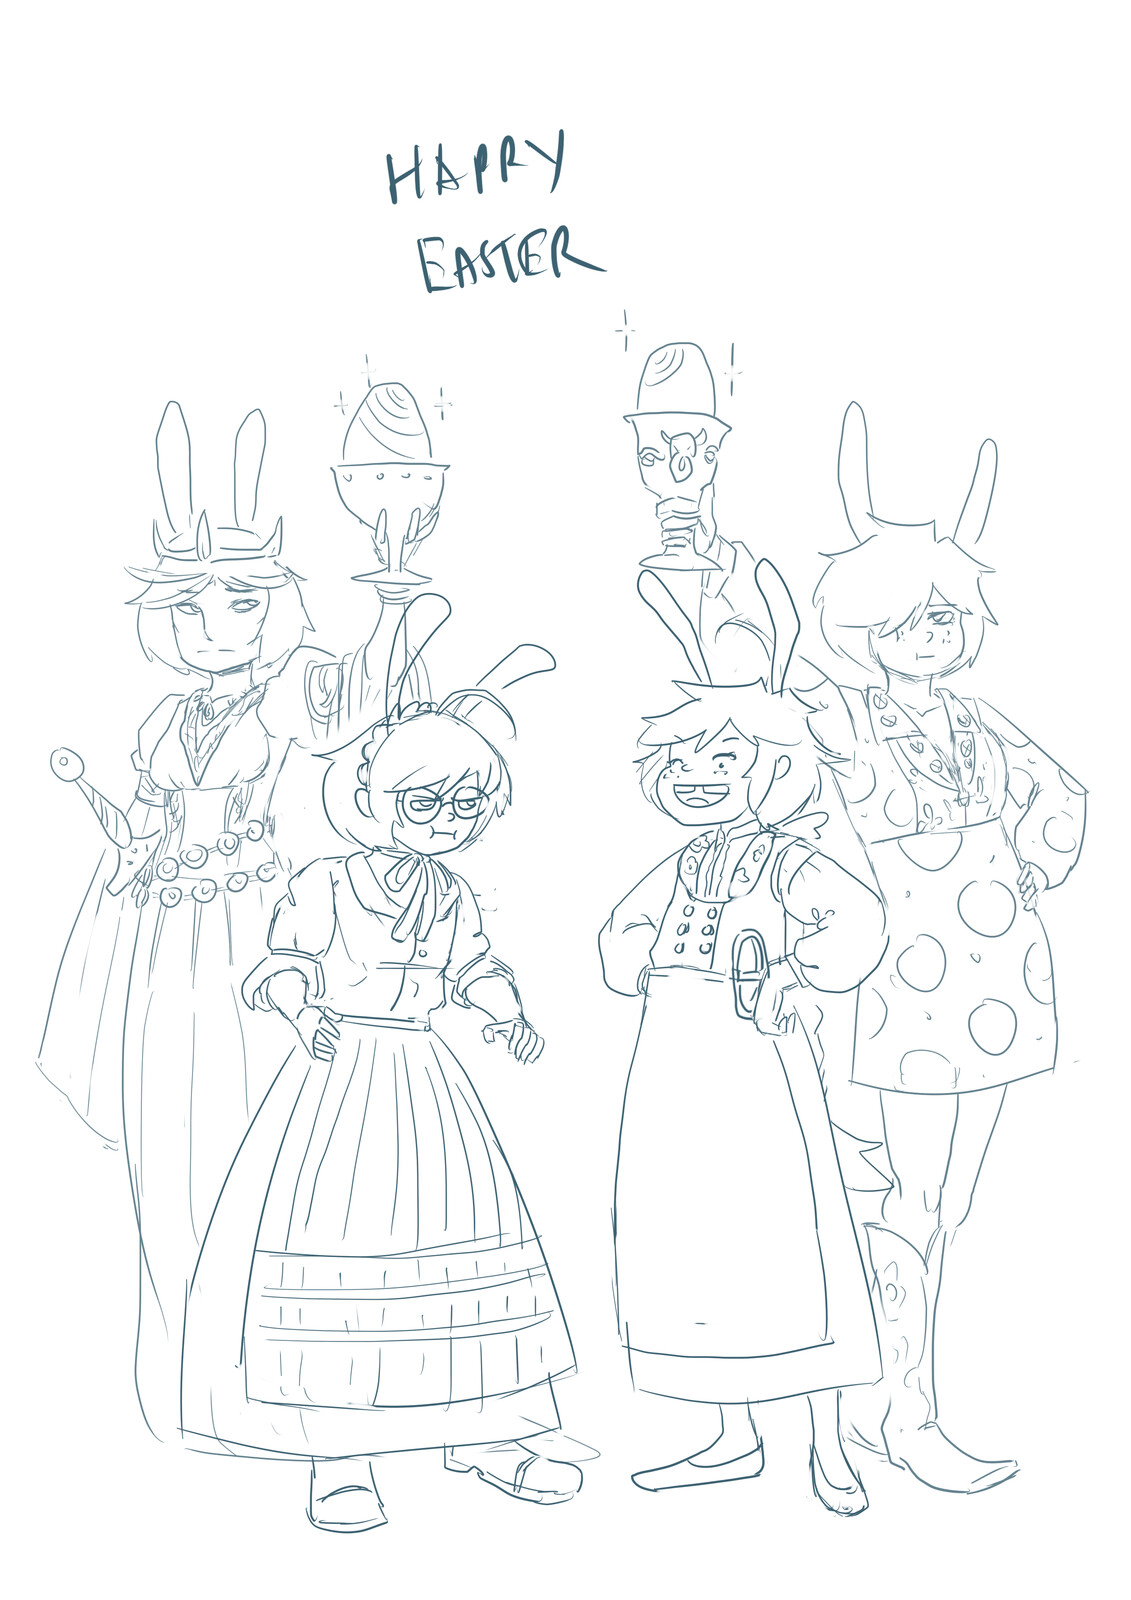 Old Easter pic. Easter is the best time to compare Welsh and Finn dresses.